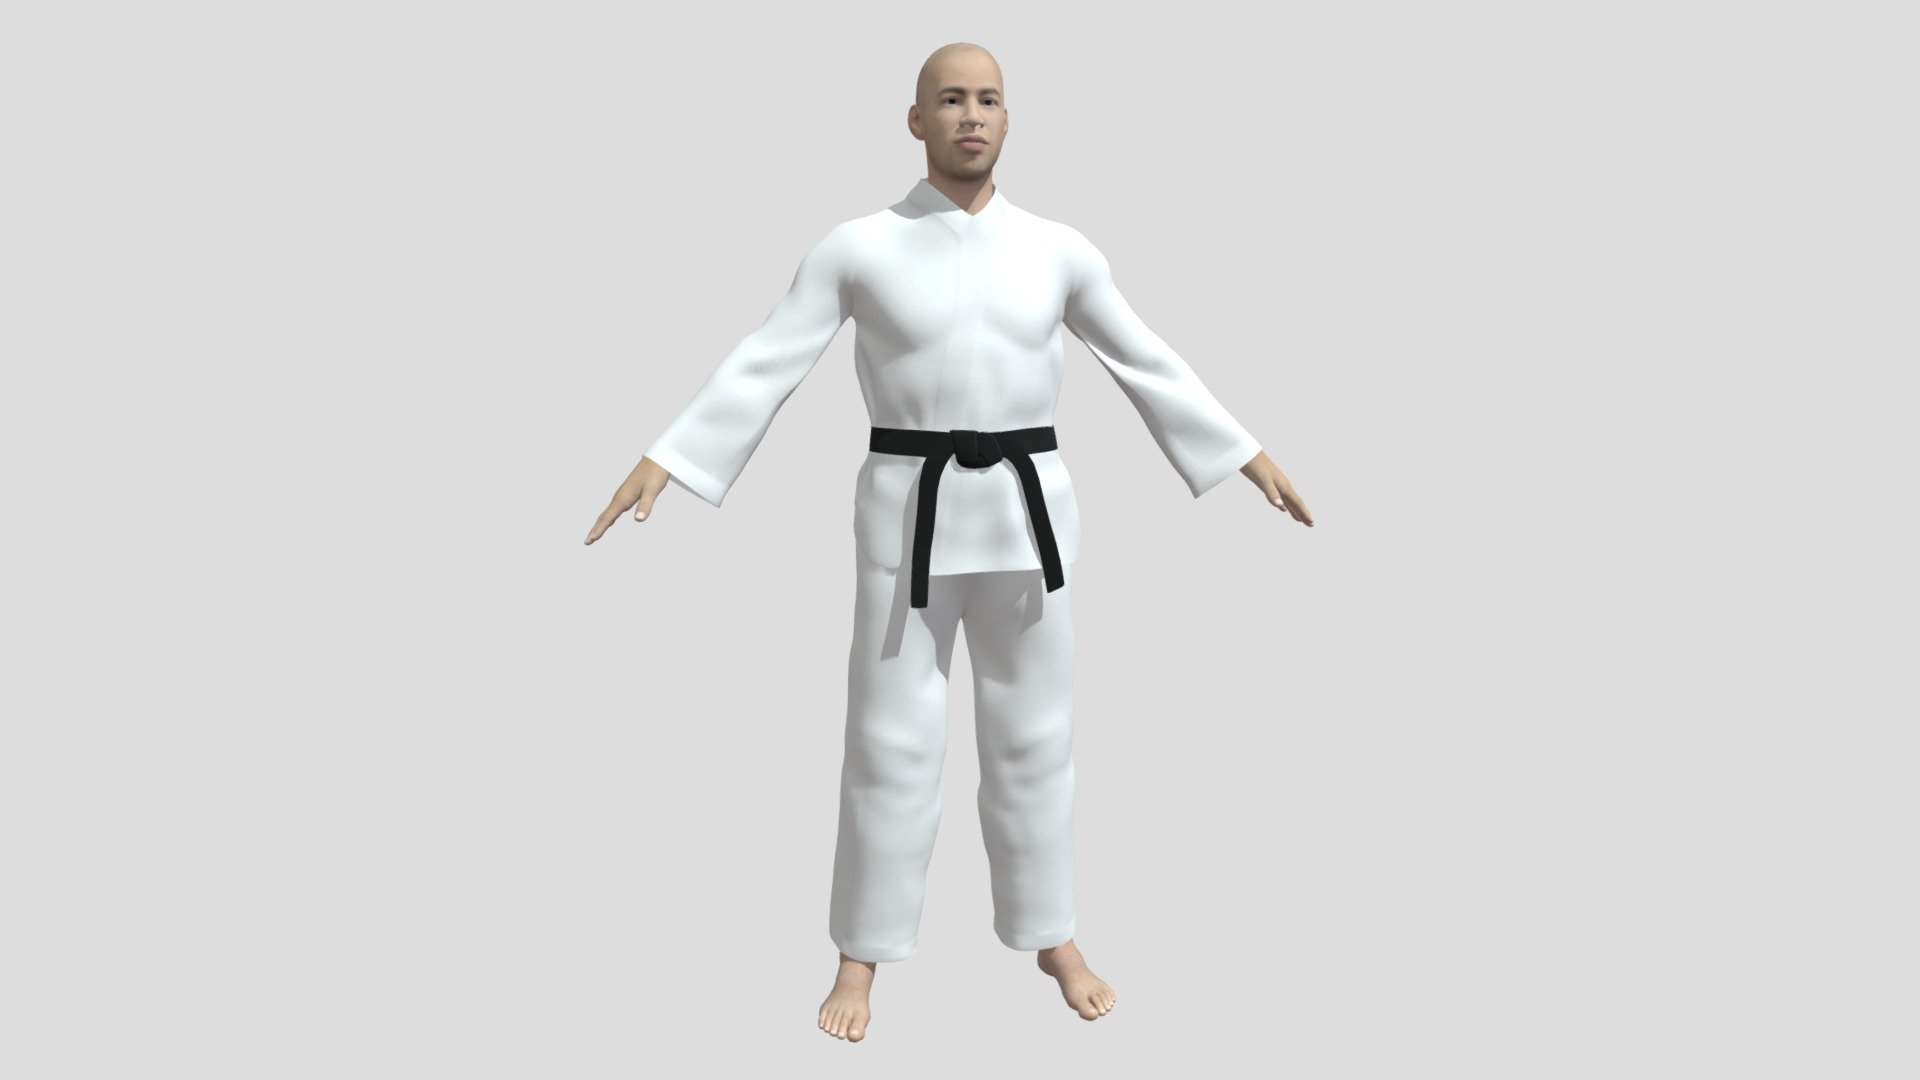 Karatae Fighter 3D model is a high quality, photo real model that will enhance detail and realism to any of your game projects or commercials. The model has a fully textured, detailed design that allows for close-up renders. 

• High quality polygonal model, with detailed texture
• Maya 2019 V-Ray and standard materials scenes 
• Textures 4096 x 4096 - Karate Fighter - Buy Royalty Free 3D model by trish.j2109 3d model